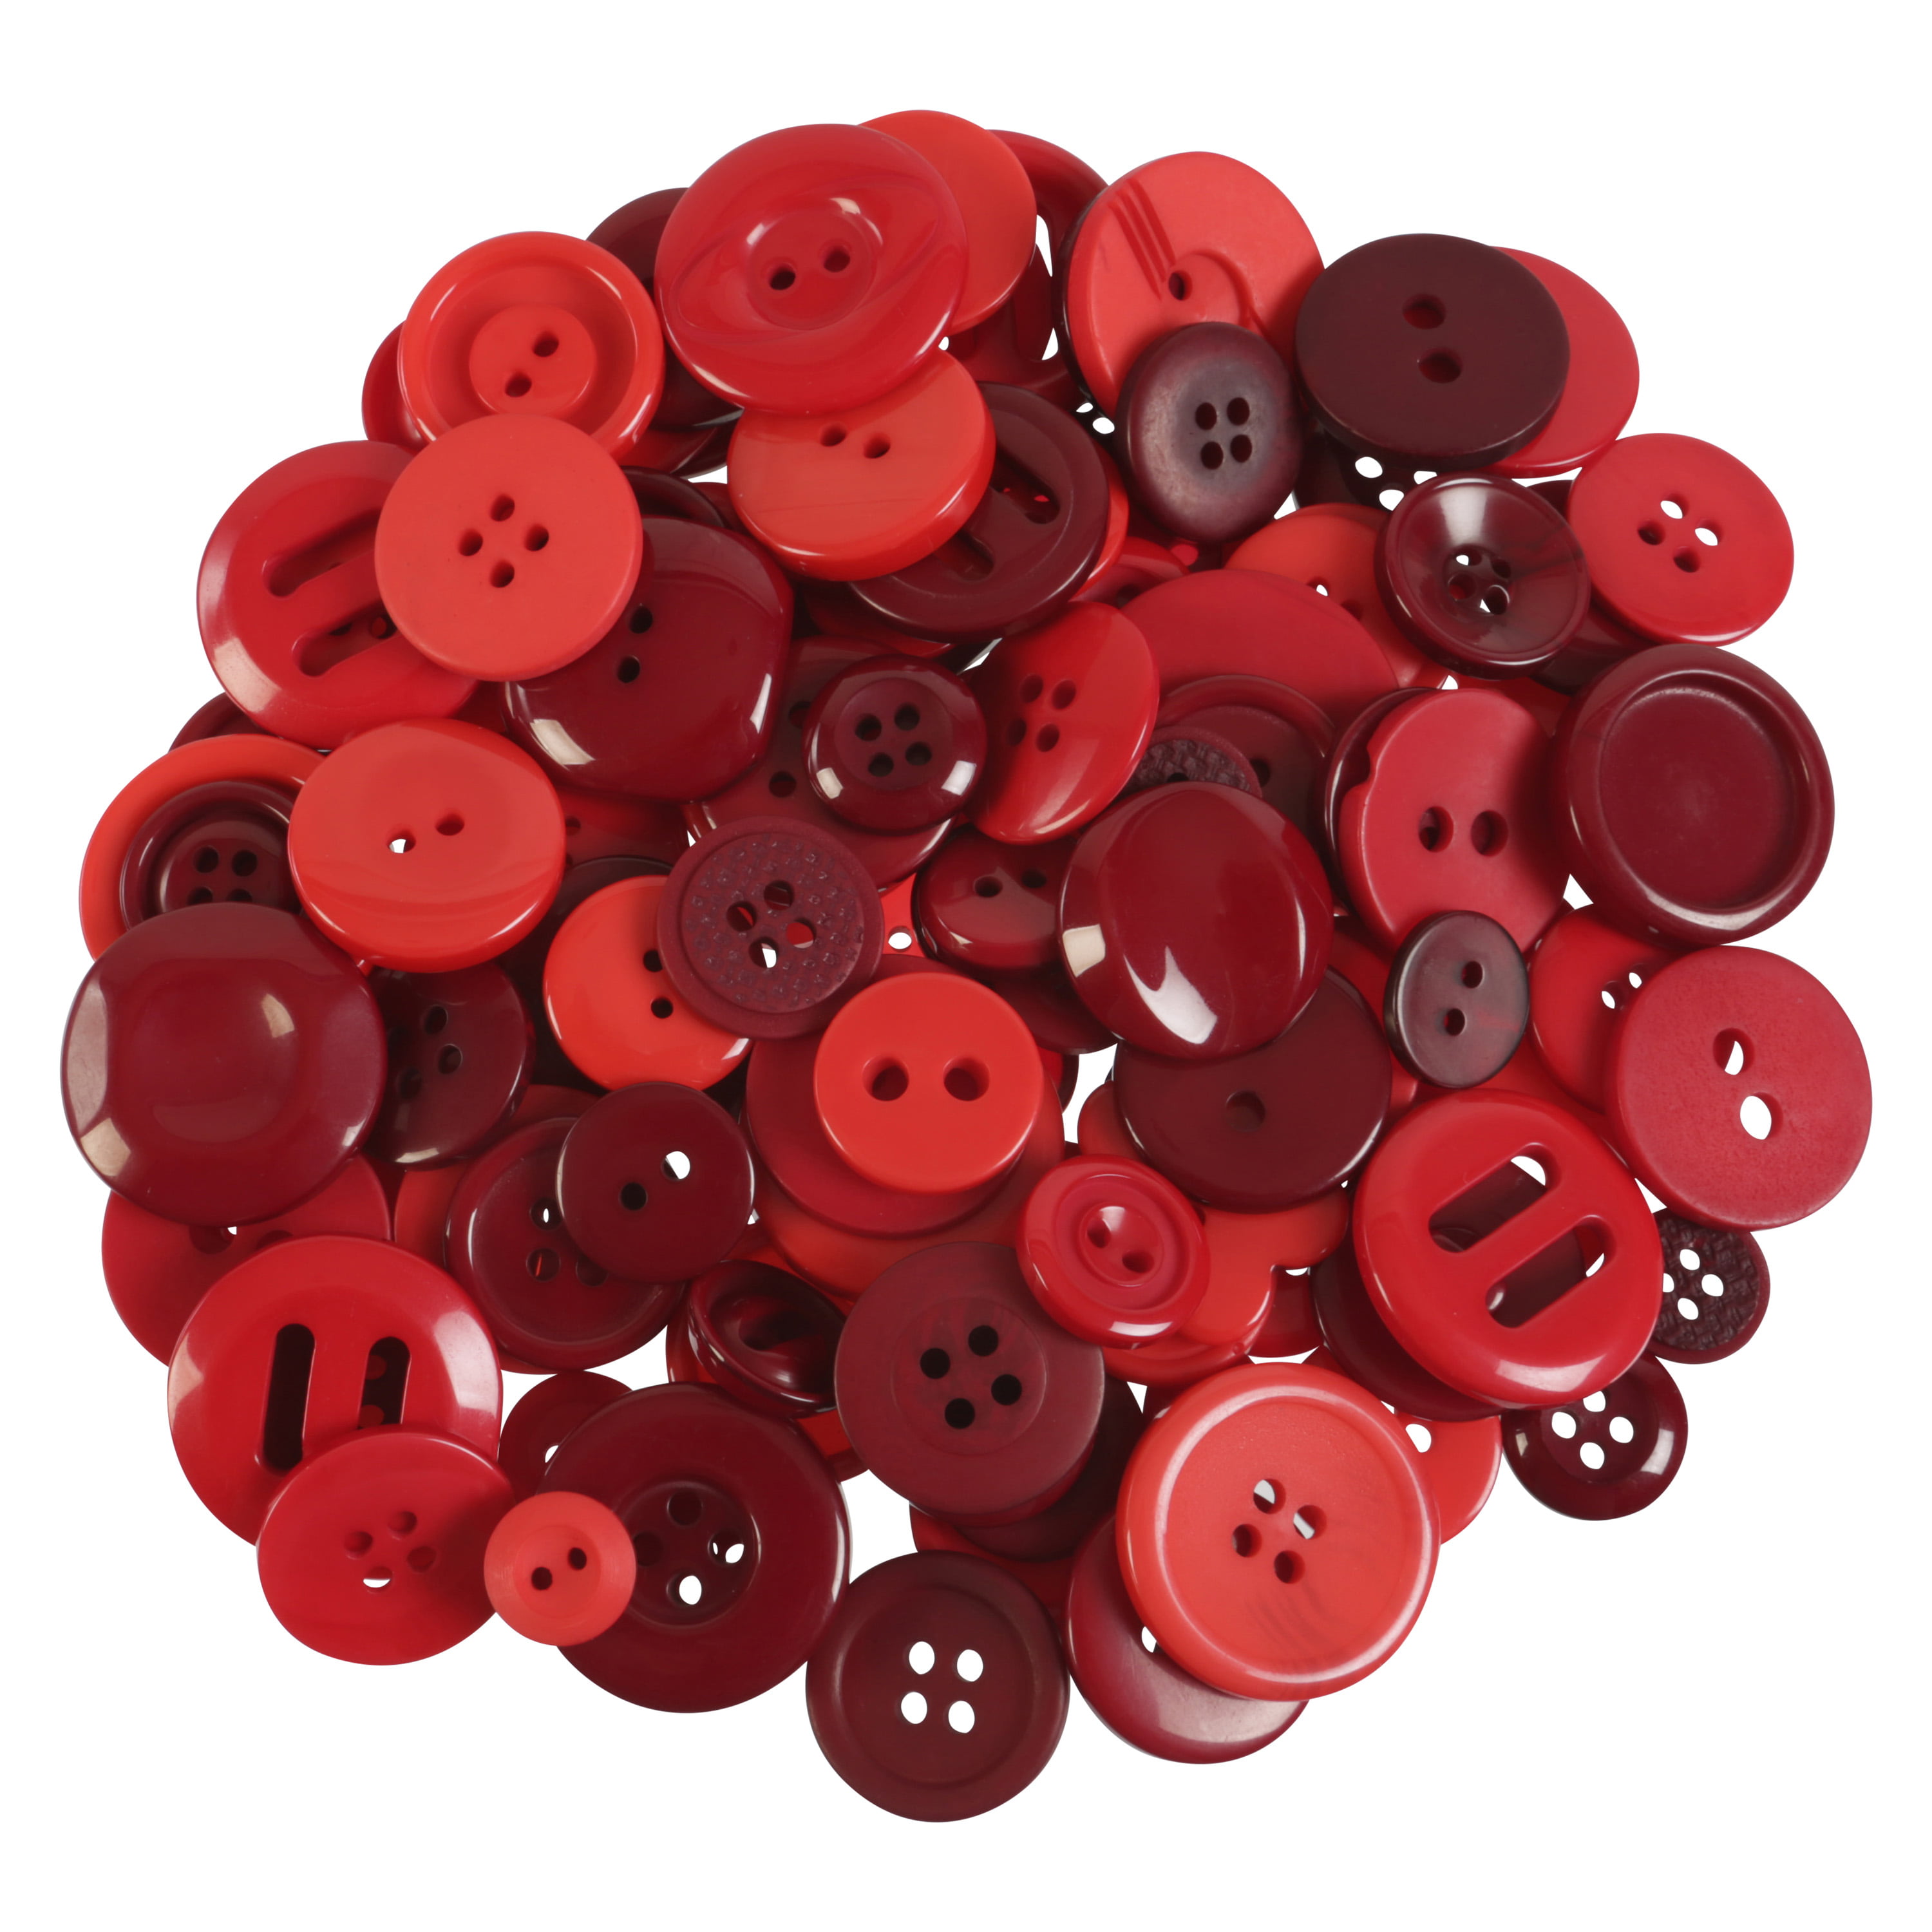 Pkg of 20 Plastic RED STAR Craft Buttons 1/2 (12mm) (2133) Assorted Colors